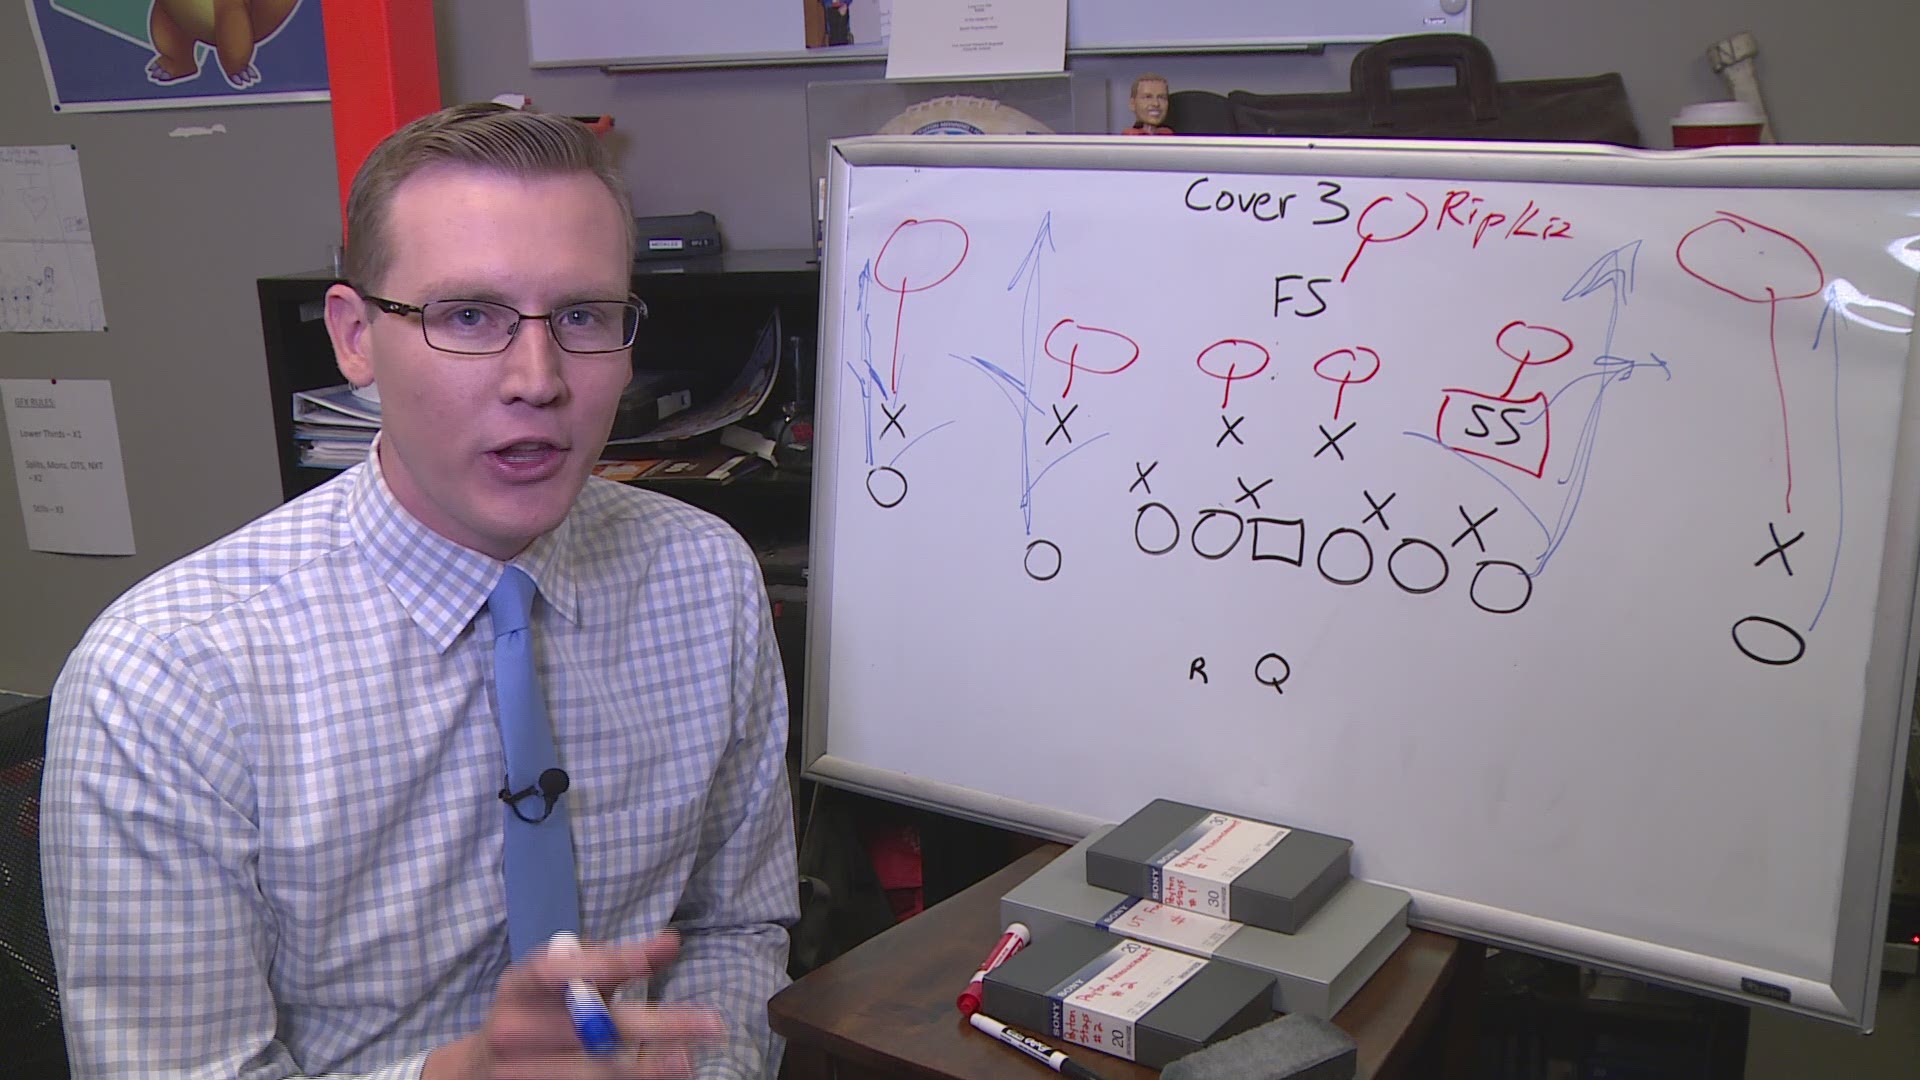 WBIR 10Sports Anchor Patrick Murray earlier explains the origins of Cover 3 Rip/Liz - a hybrid man/zone pattern match coverage that we'll see Jeremy Pruitt use with the Vols defense this season. It's a Nick Saban staple, a coverage he and Bill Belichick i